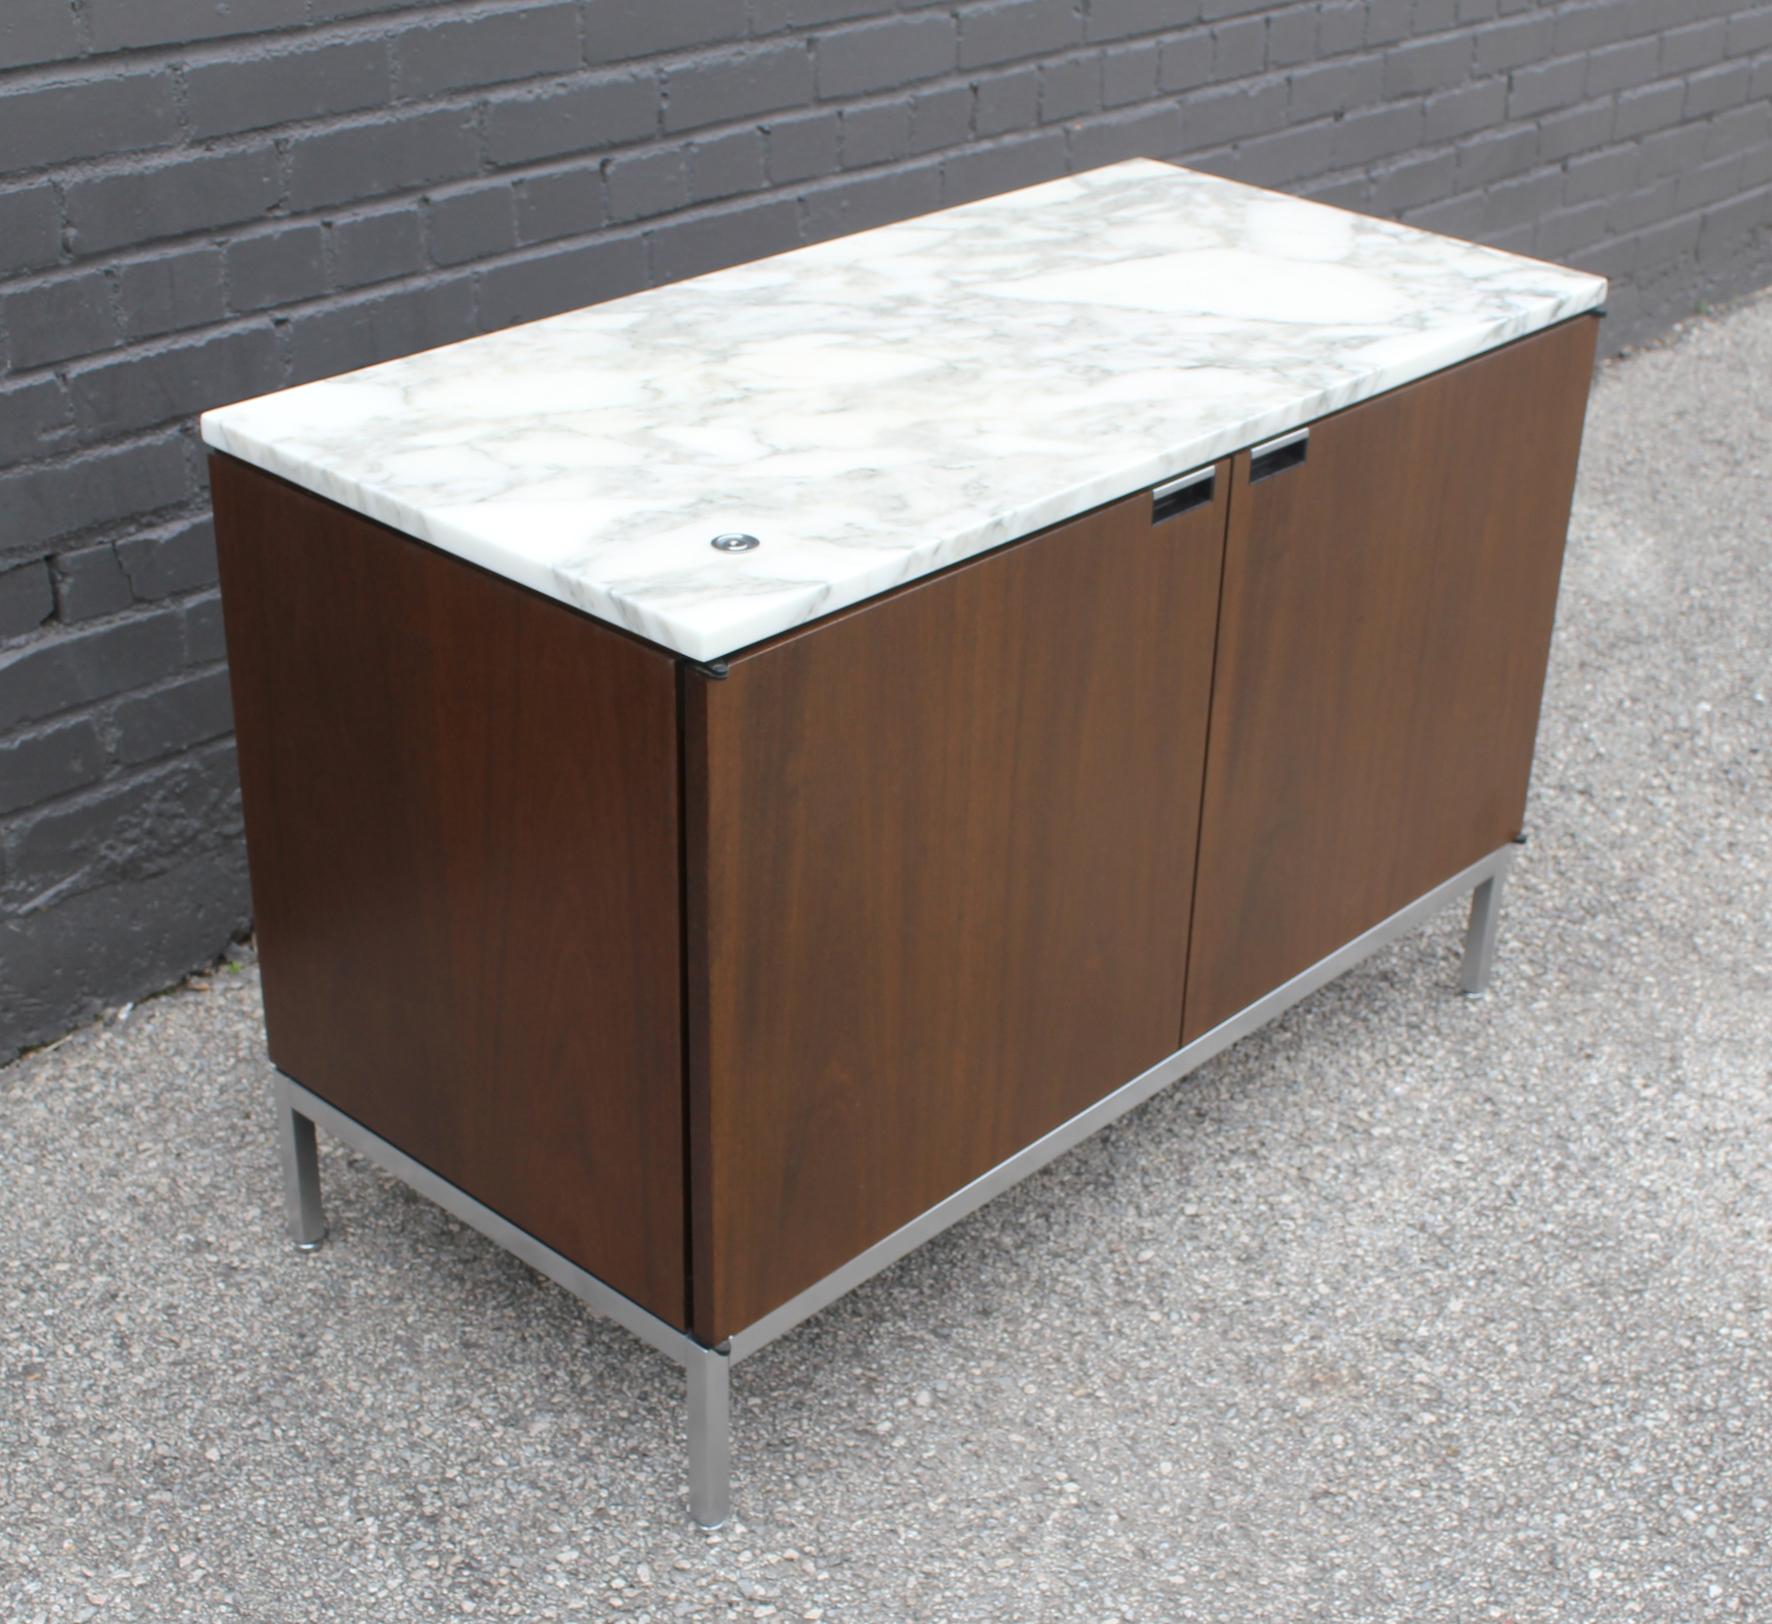 Authentic Florence knoll credenza with marble top. Includes original Knoll branded key to lock the doors. All 4 adjustable levelers are intact. Very good original condition.